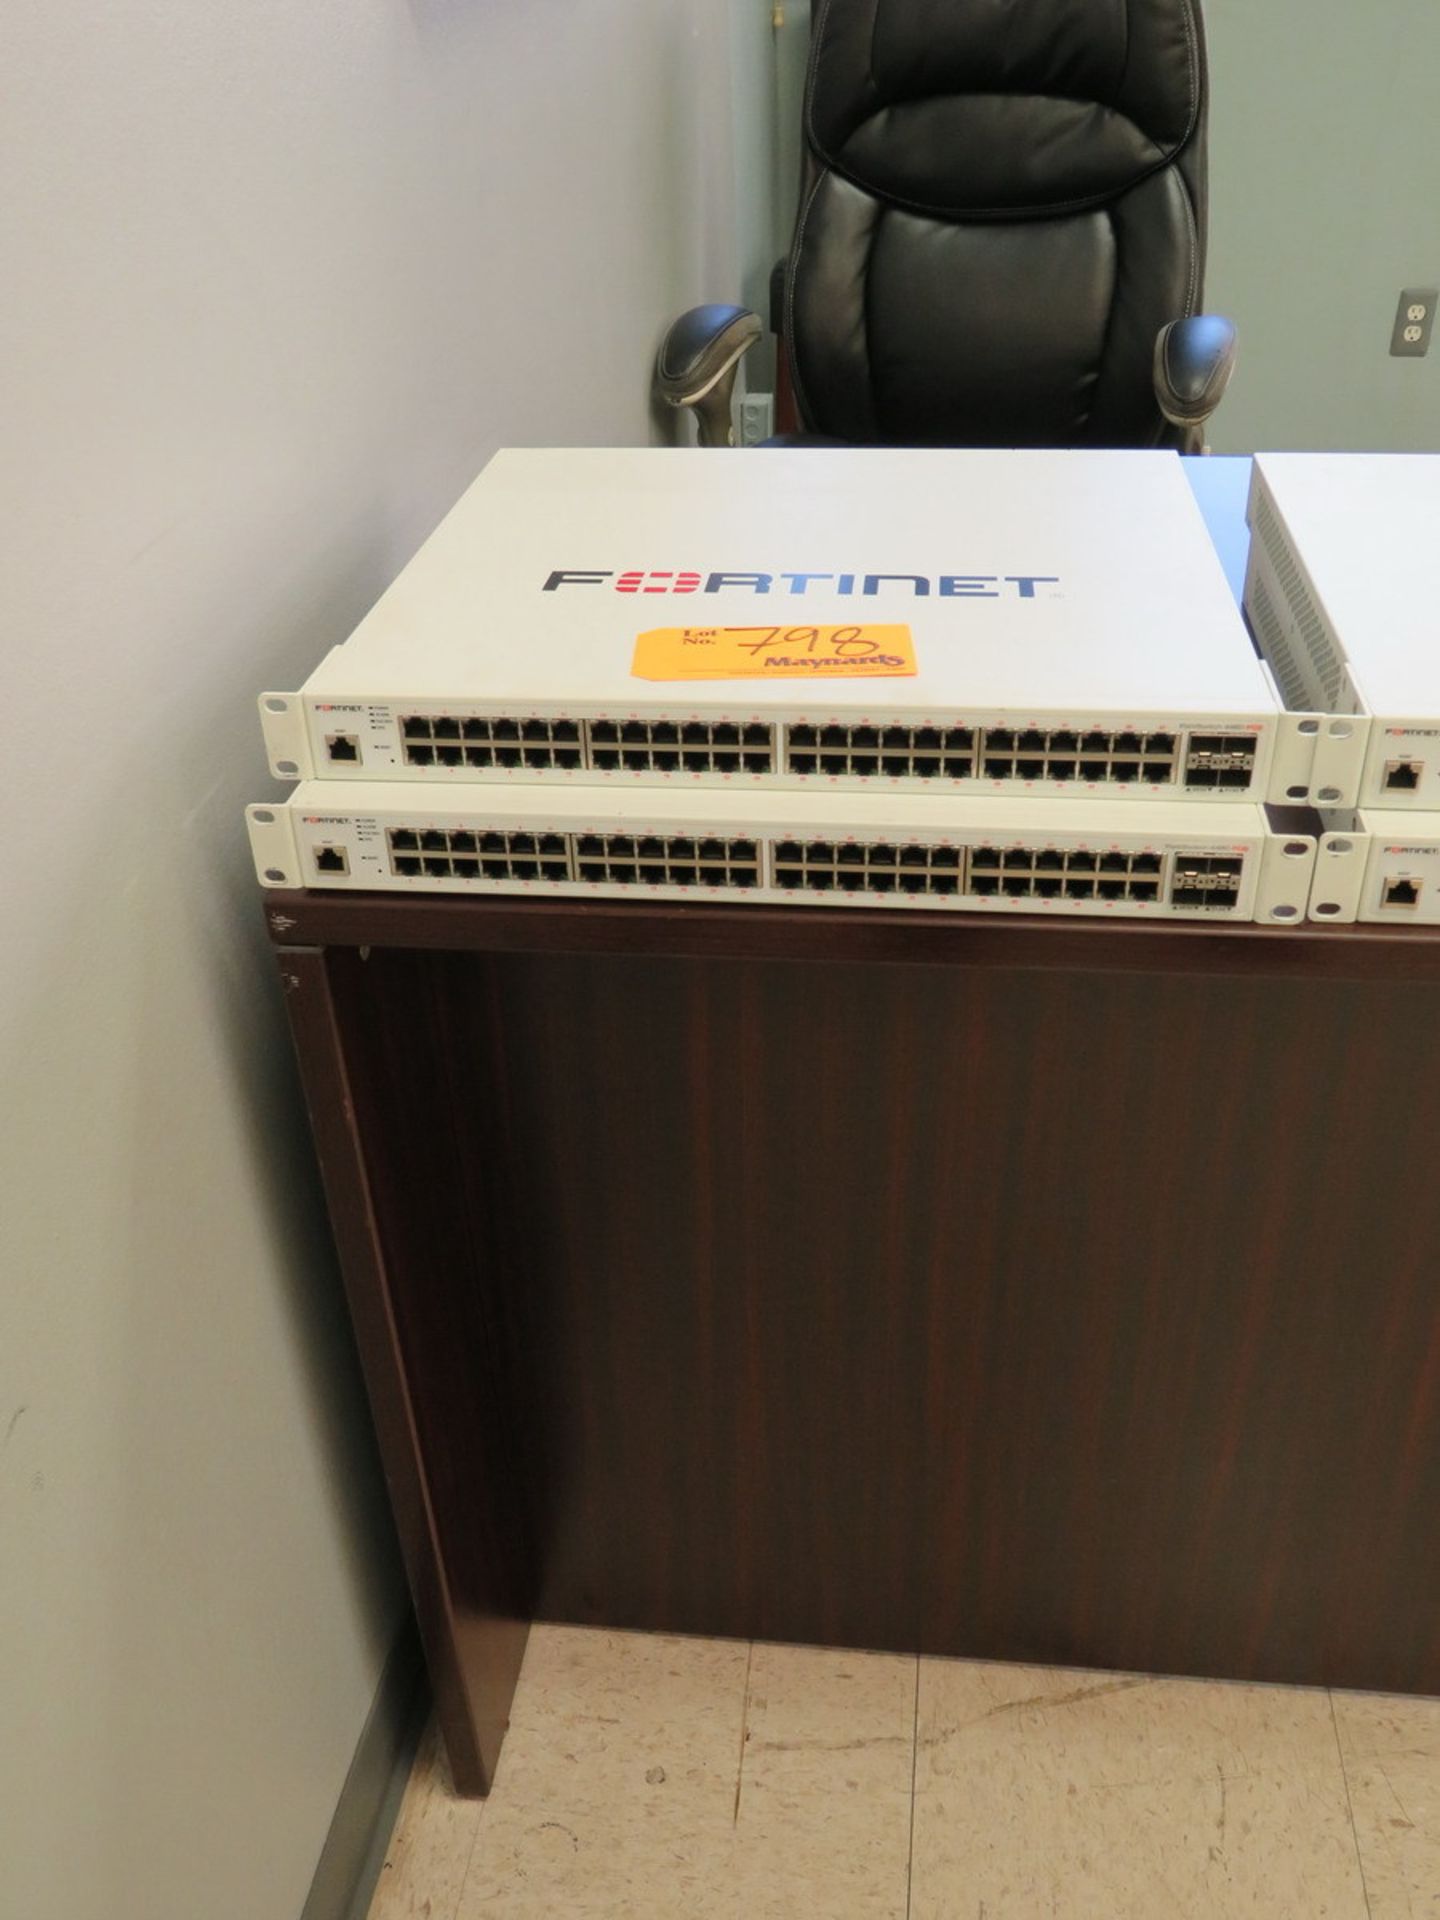 Fortinet FortiSwitch 448D-POE 48-Port Ethernet Switch